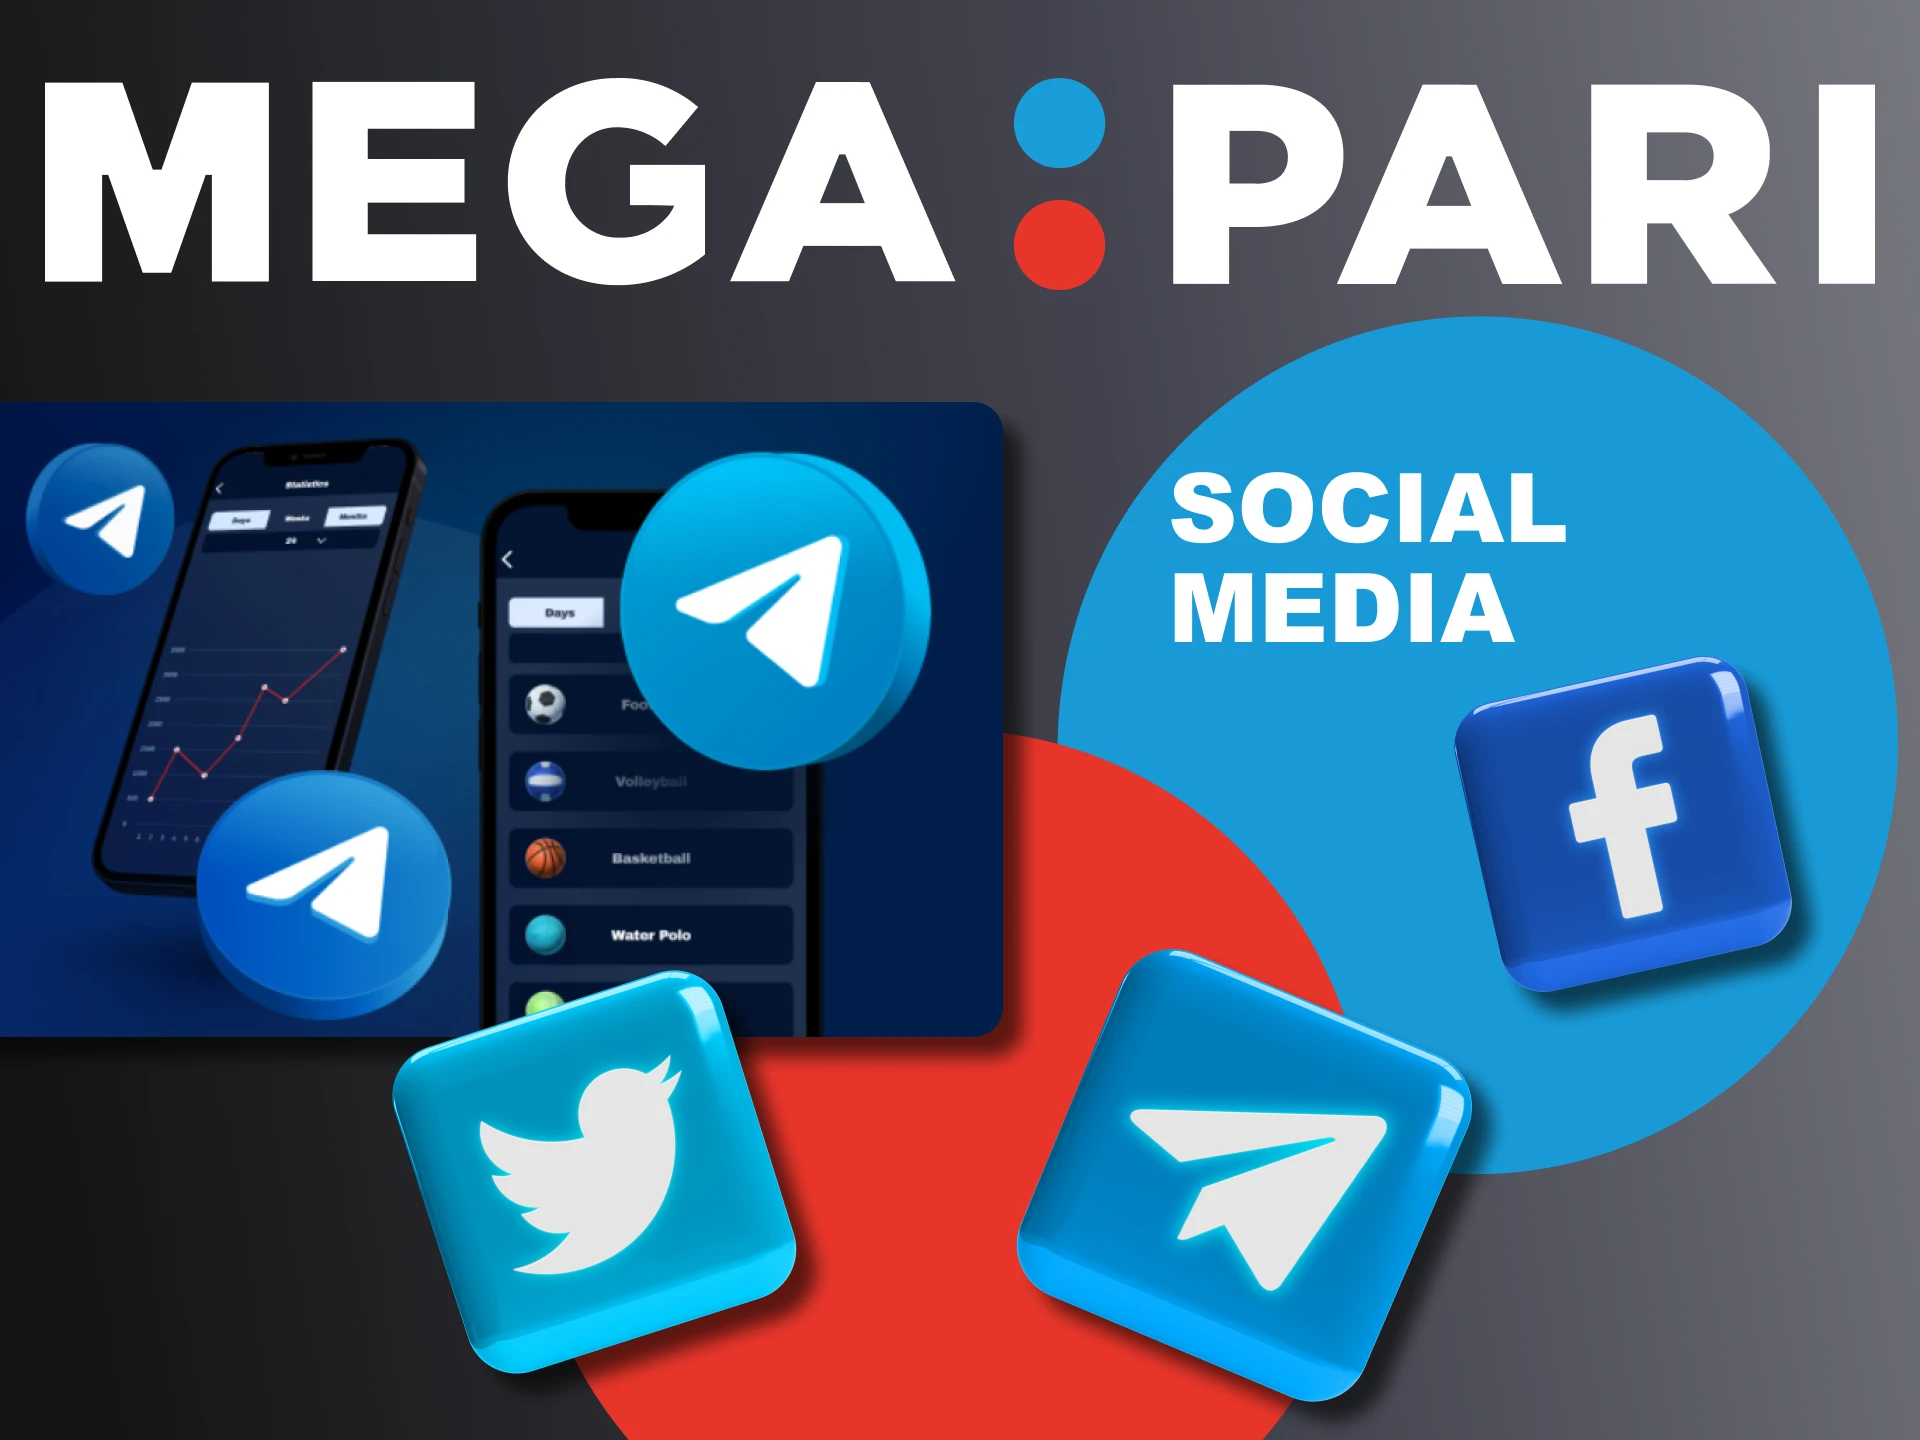 Use social media and messengers to contact Megapari support.